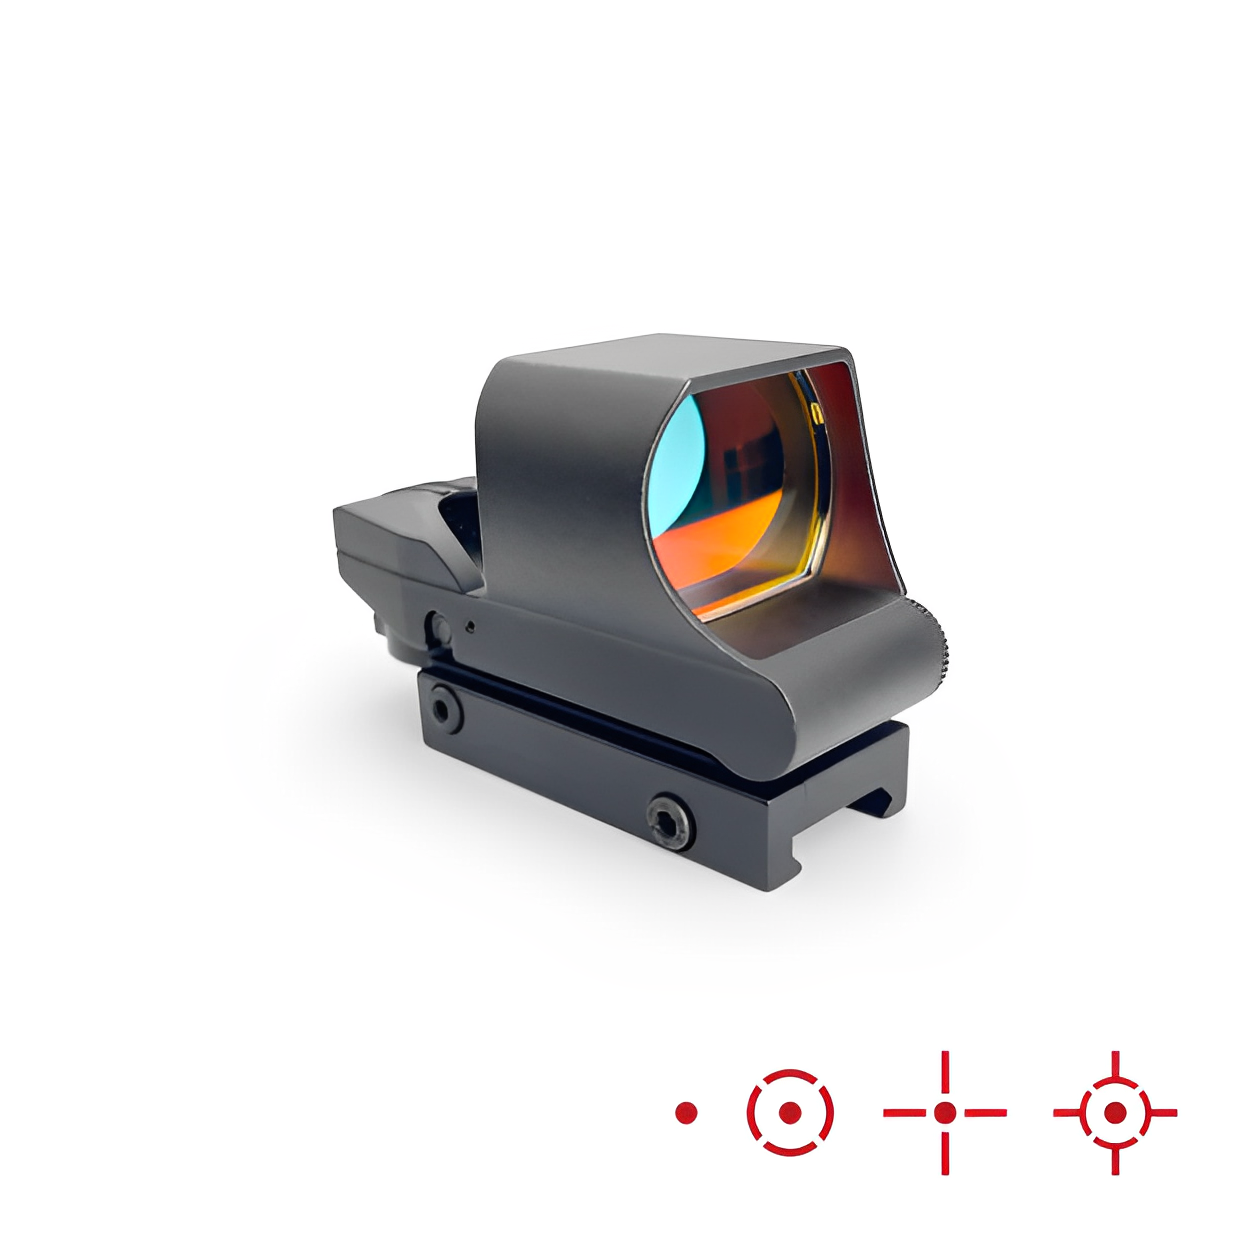 HOLOGRAPHIC REFLEX SIGHT RS-30